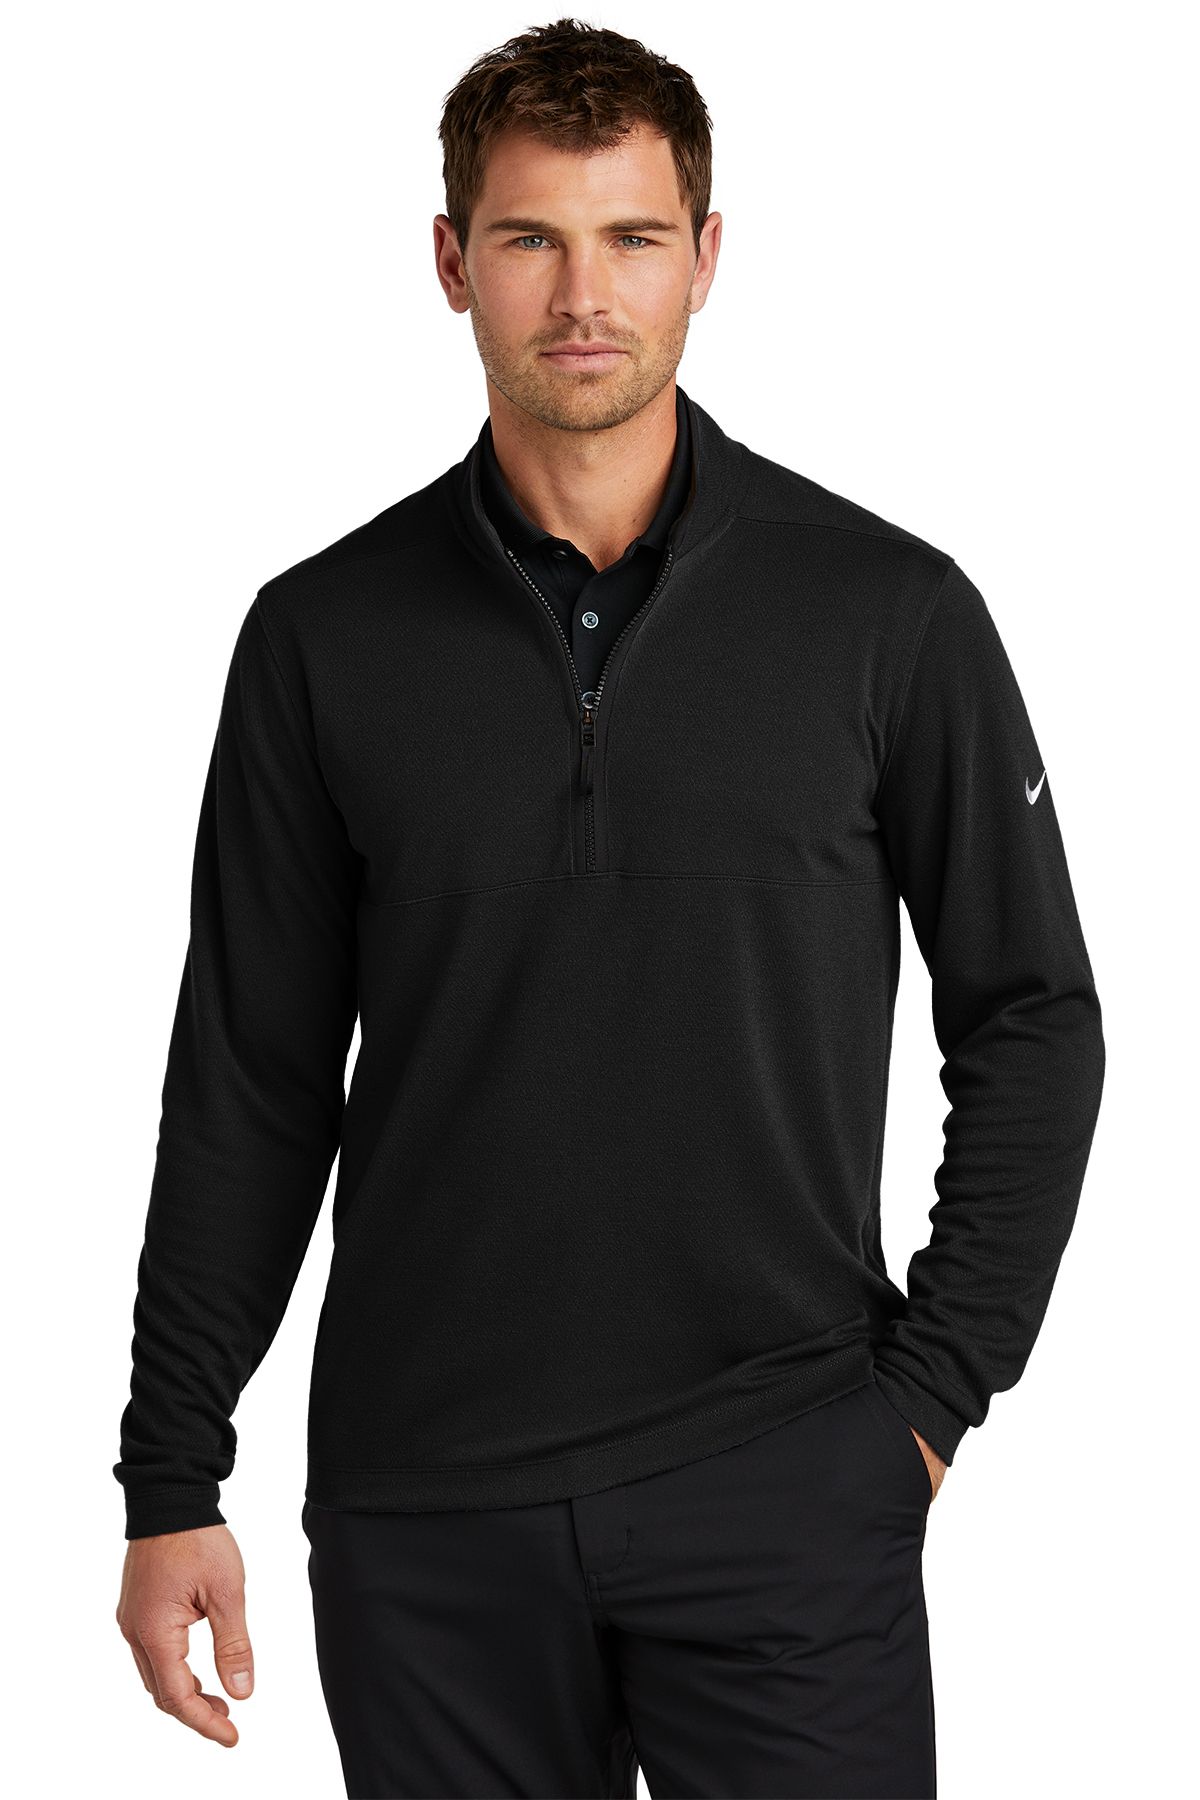 Nike Textured 1/2-Zip Cover-Up. NKDX6702 - Logo Shirts Direct